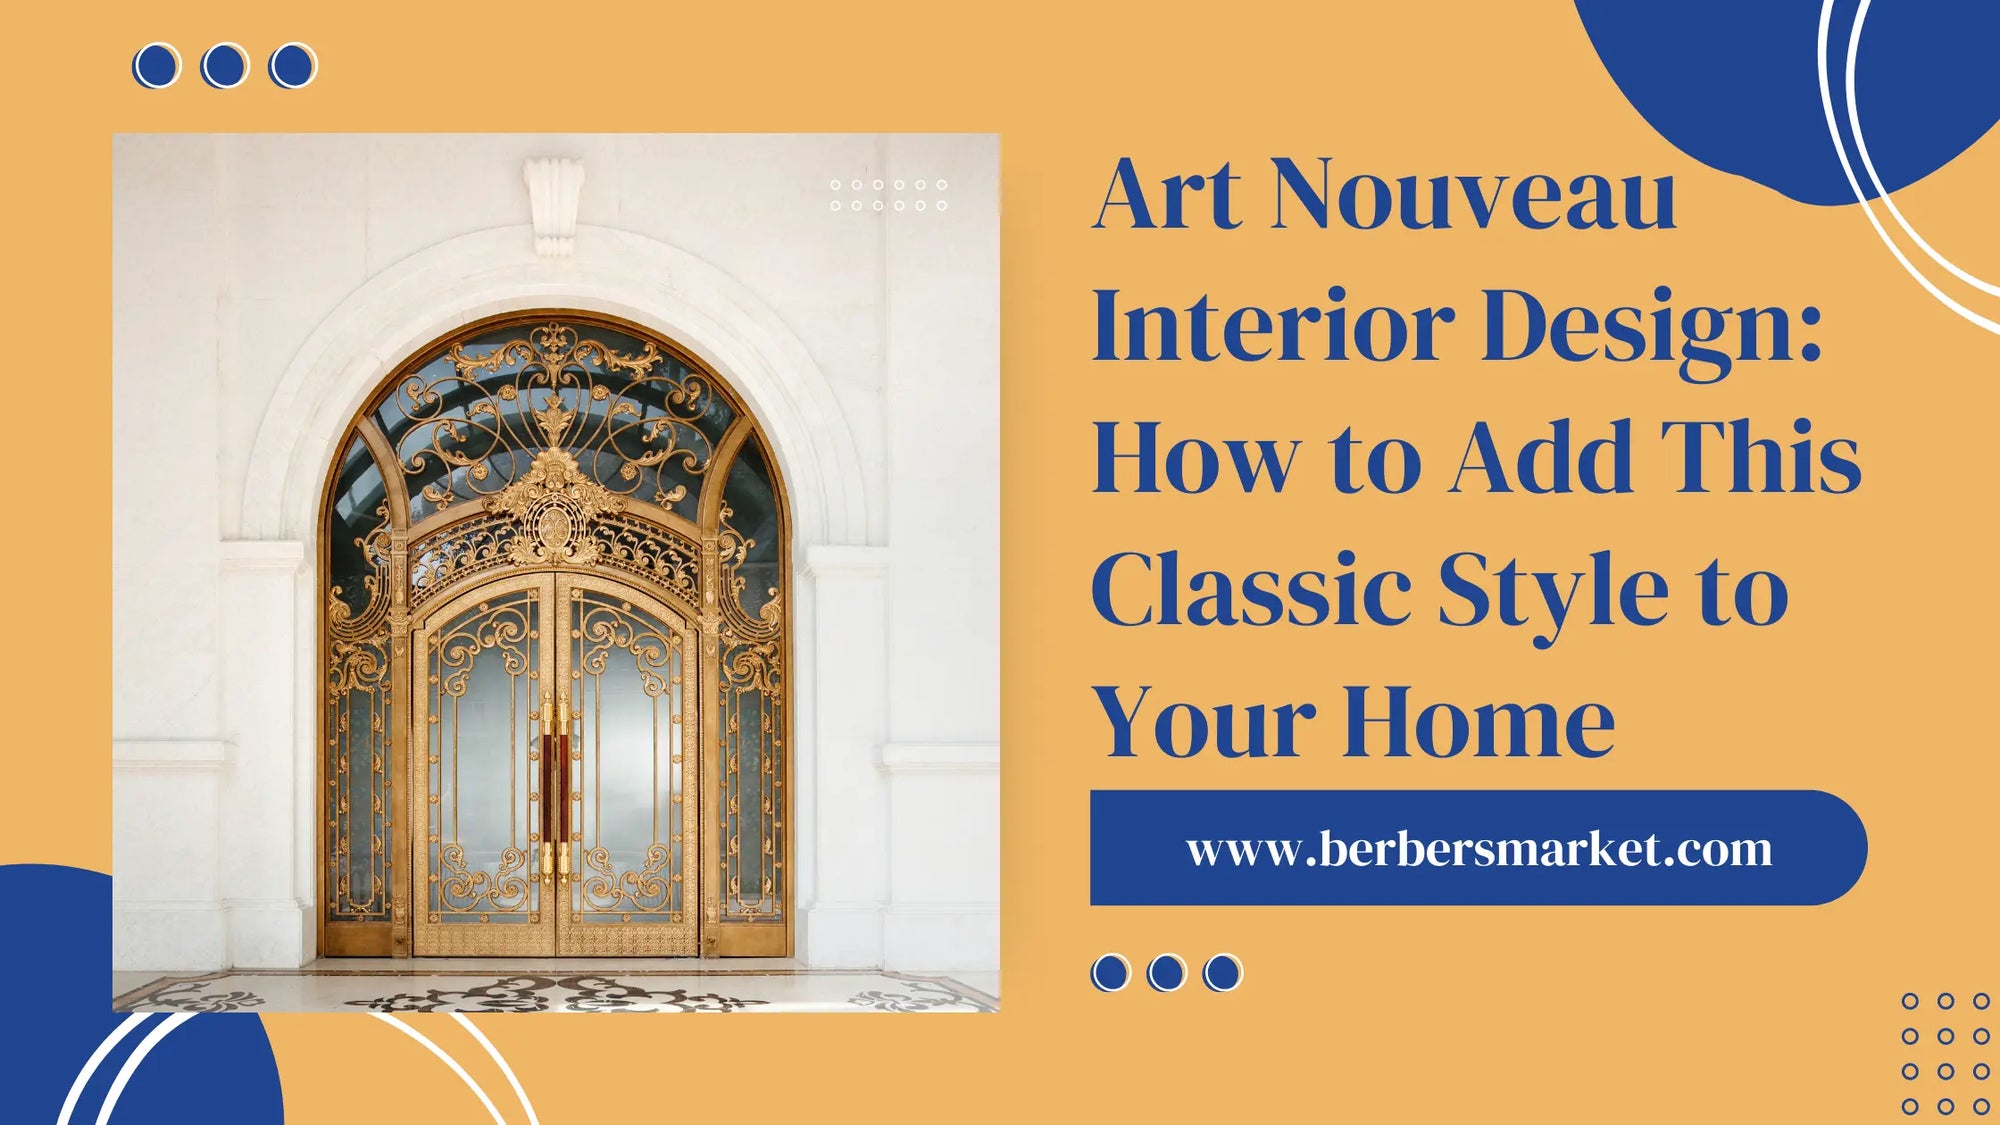 Blog banner talking about: "Art Nouveau Interior Design: How to Add This Classic Style to Your Home" with a picture showing an Art Nouveau door.